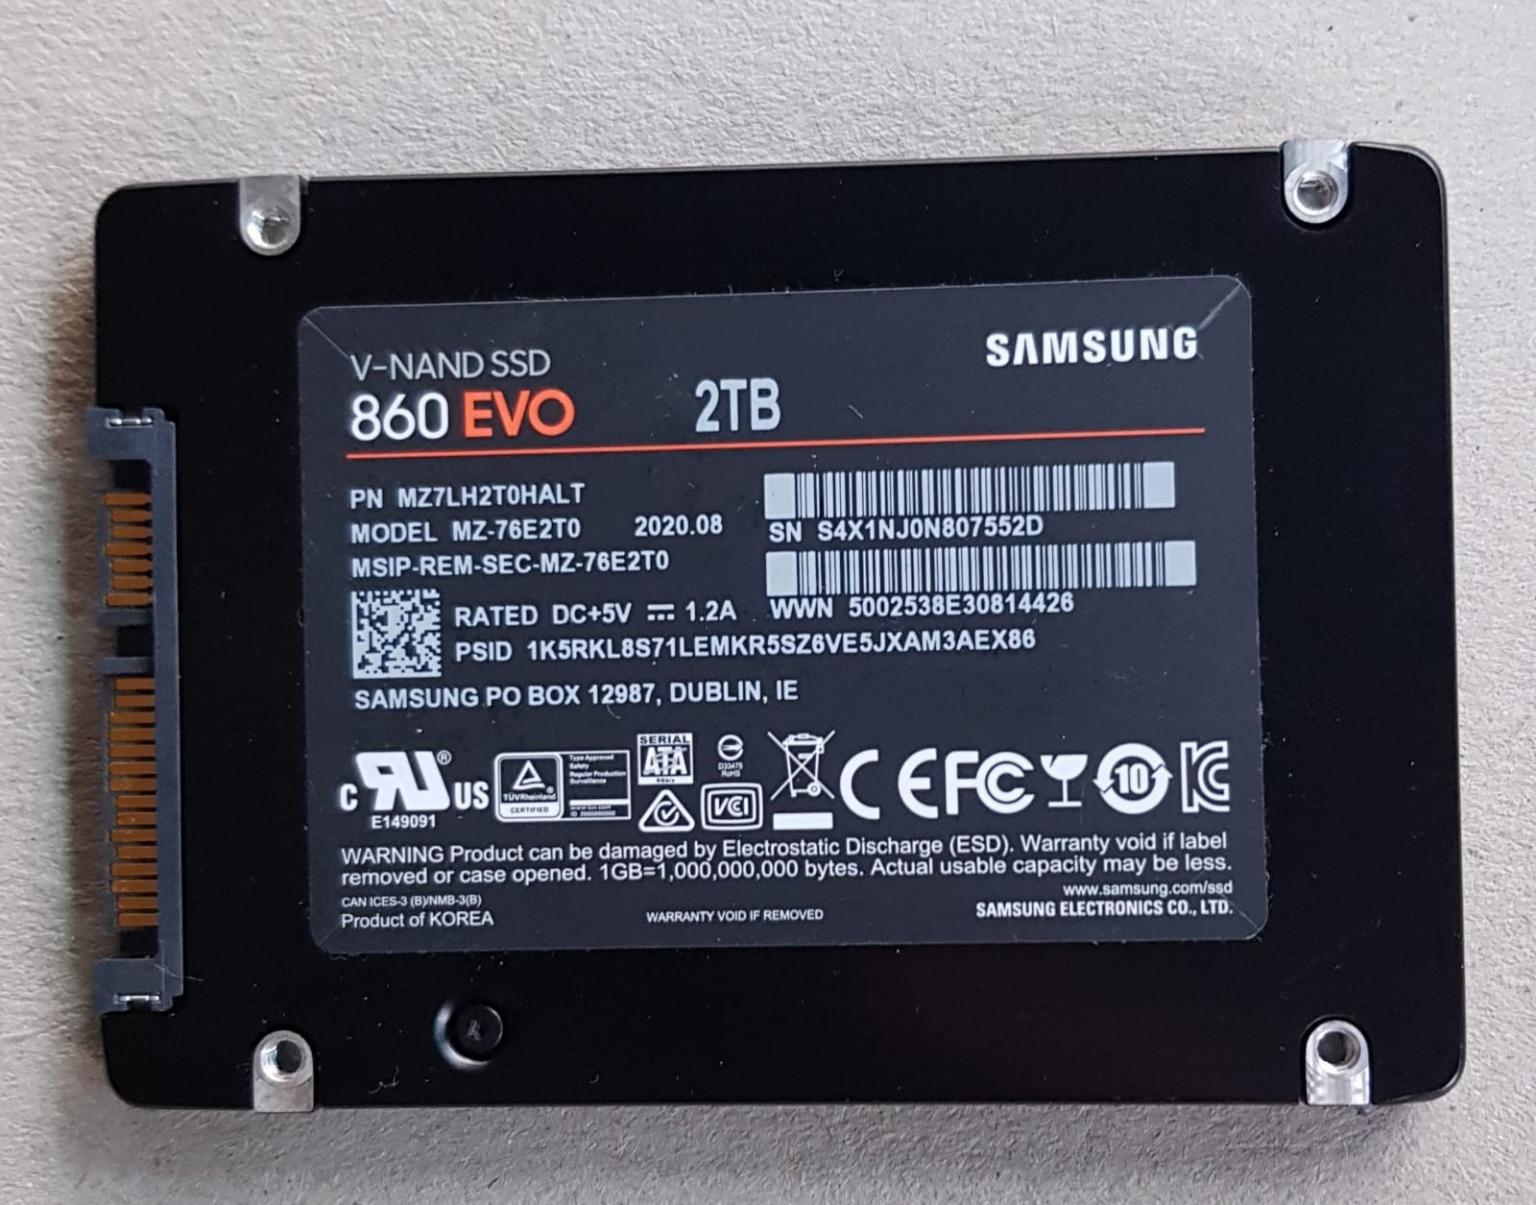 Samsung 860 Evo 2tb 2 5 Ssd For Laptop In E6 Newham For 180 00 For Sale Shpock